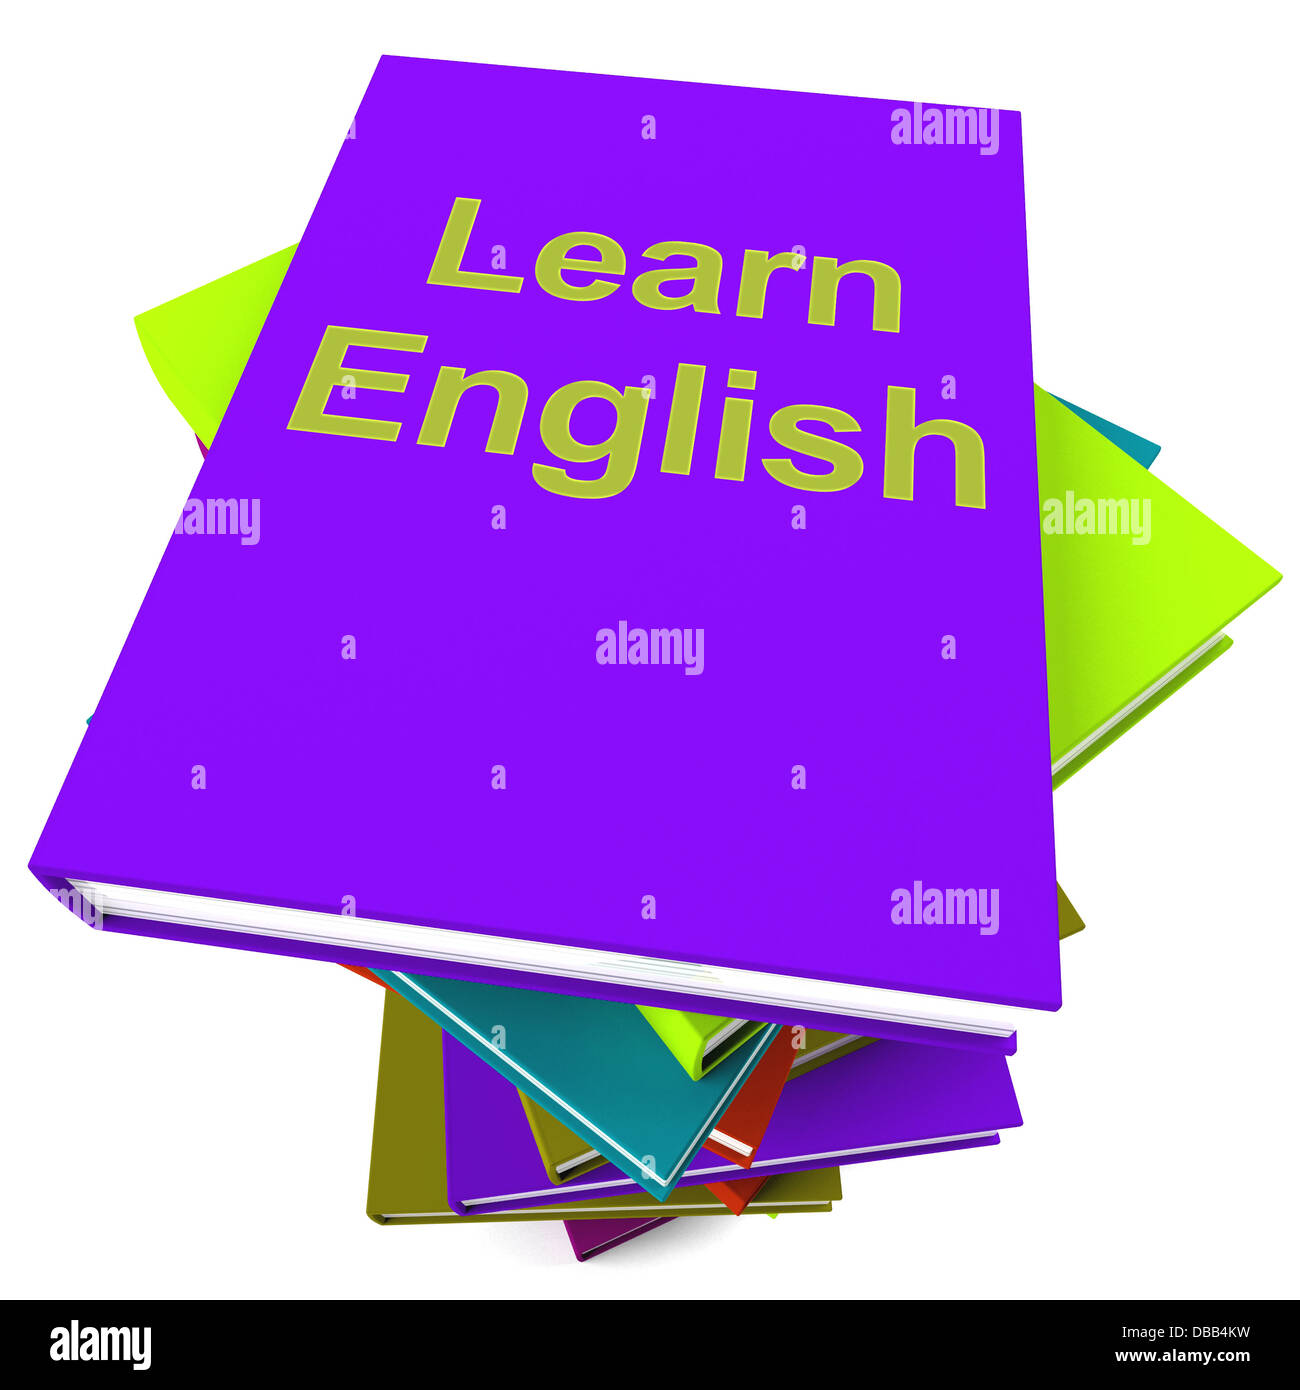 Learn English Book For Studying A Language Stock Photo